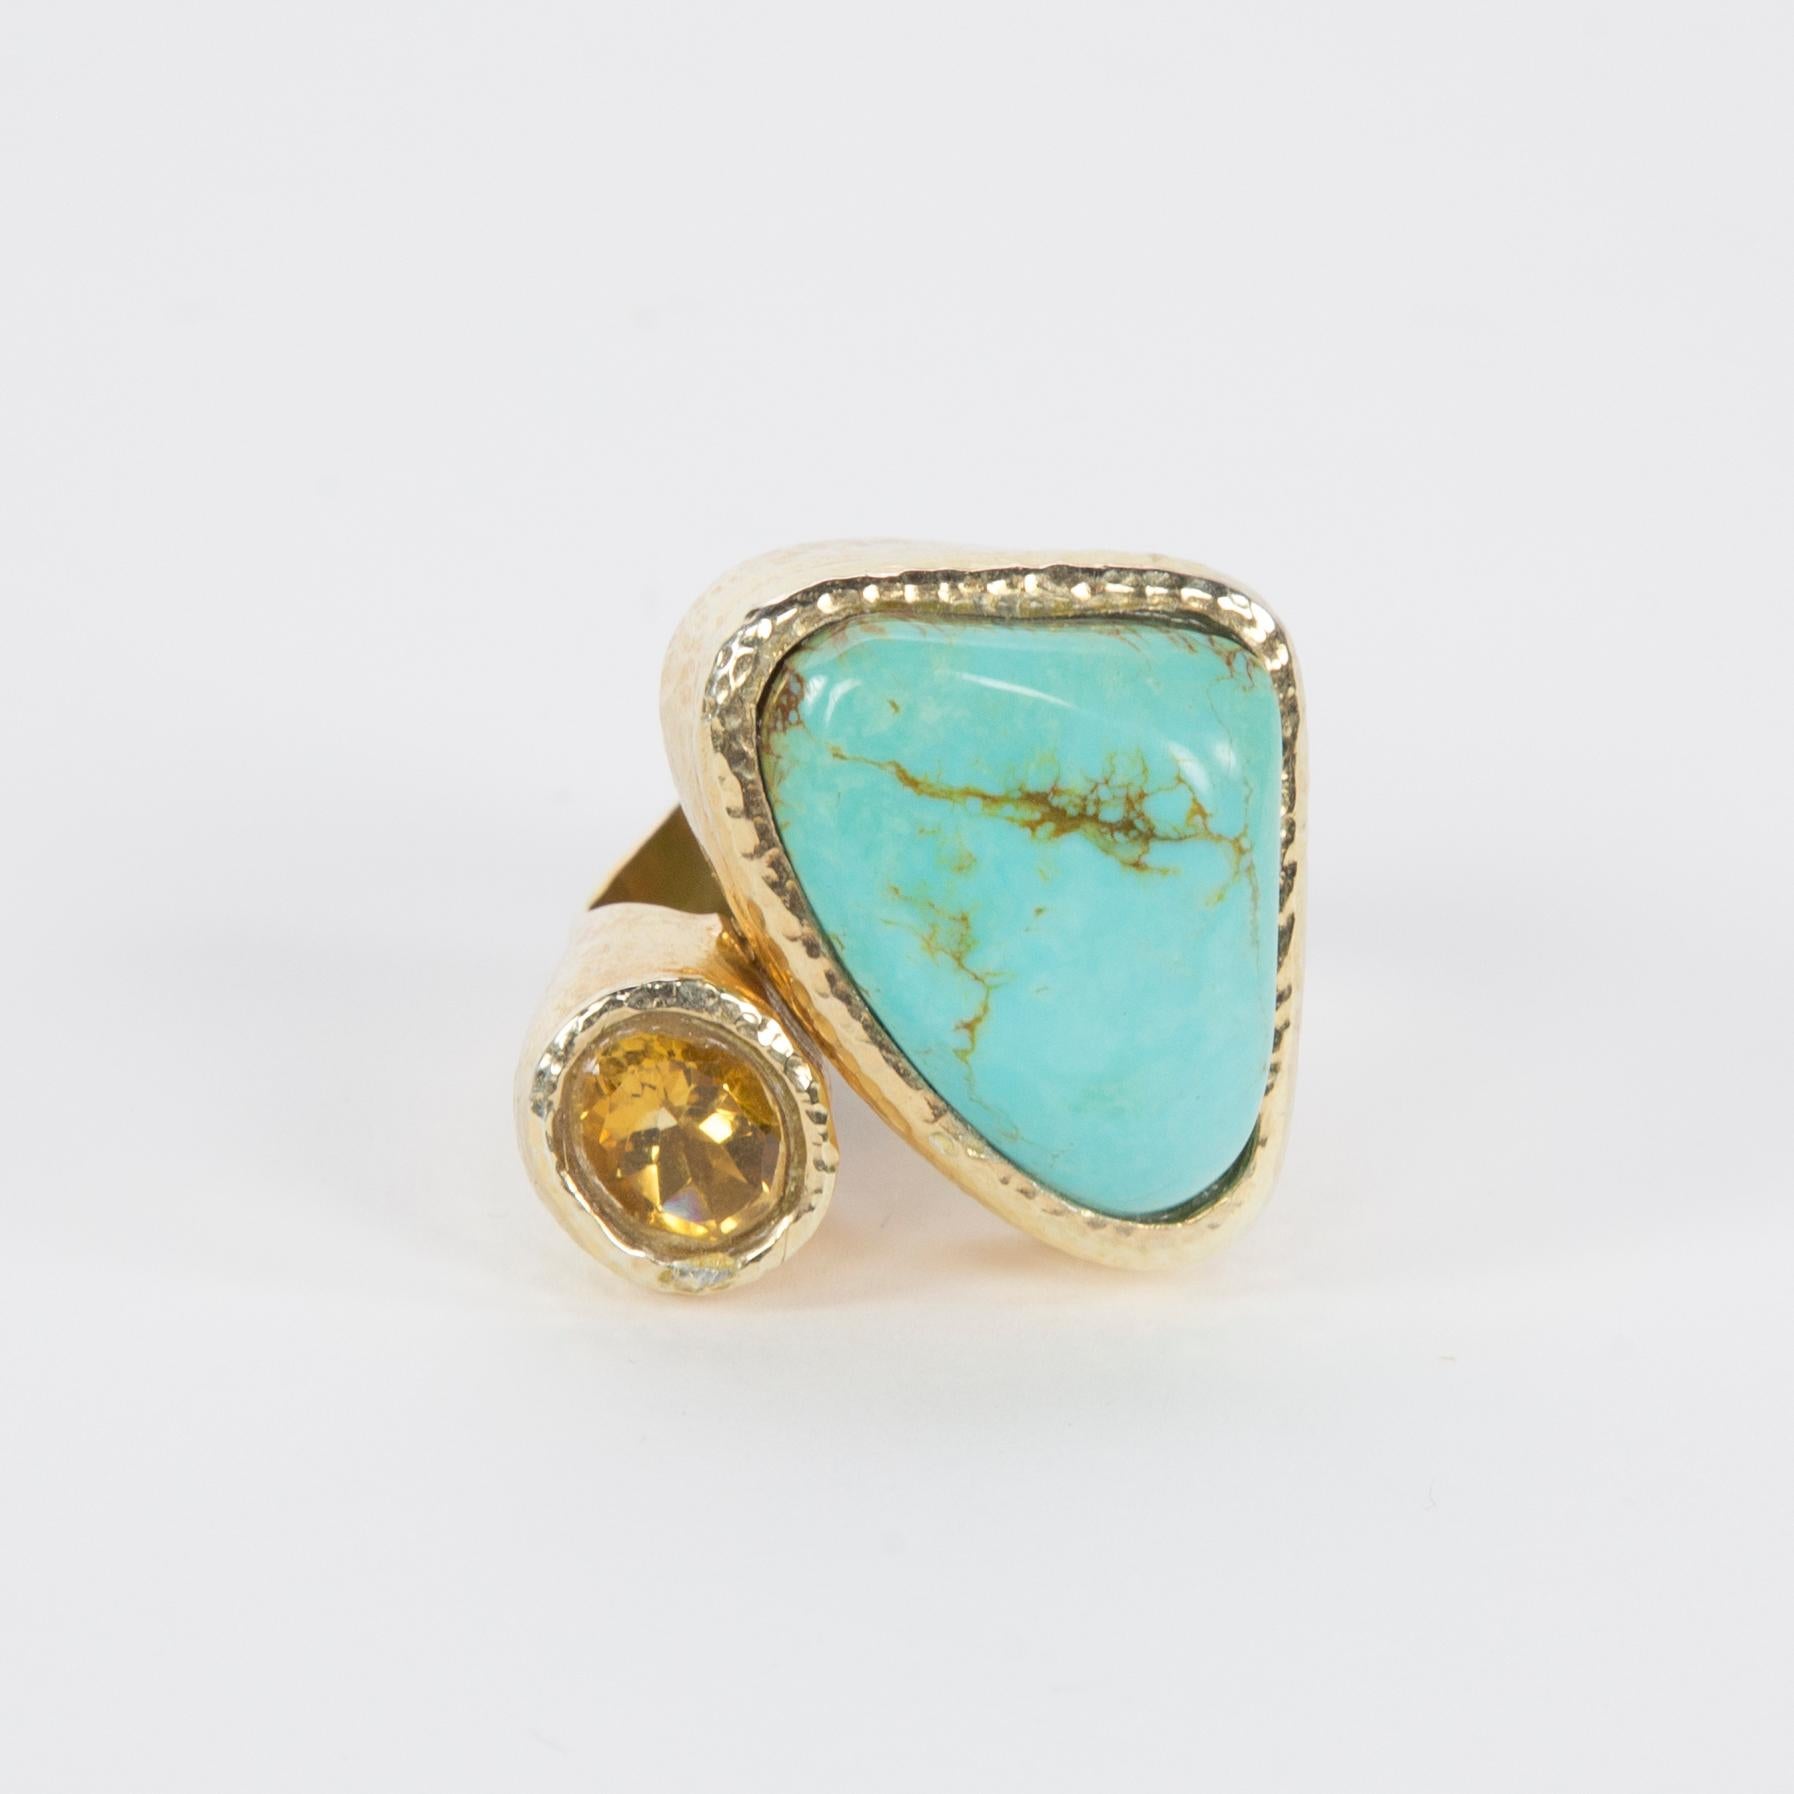 Modern Outstanding 45 Carat Turquoise and Citrine Gilt Sterling Silver Statement Ring